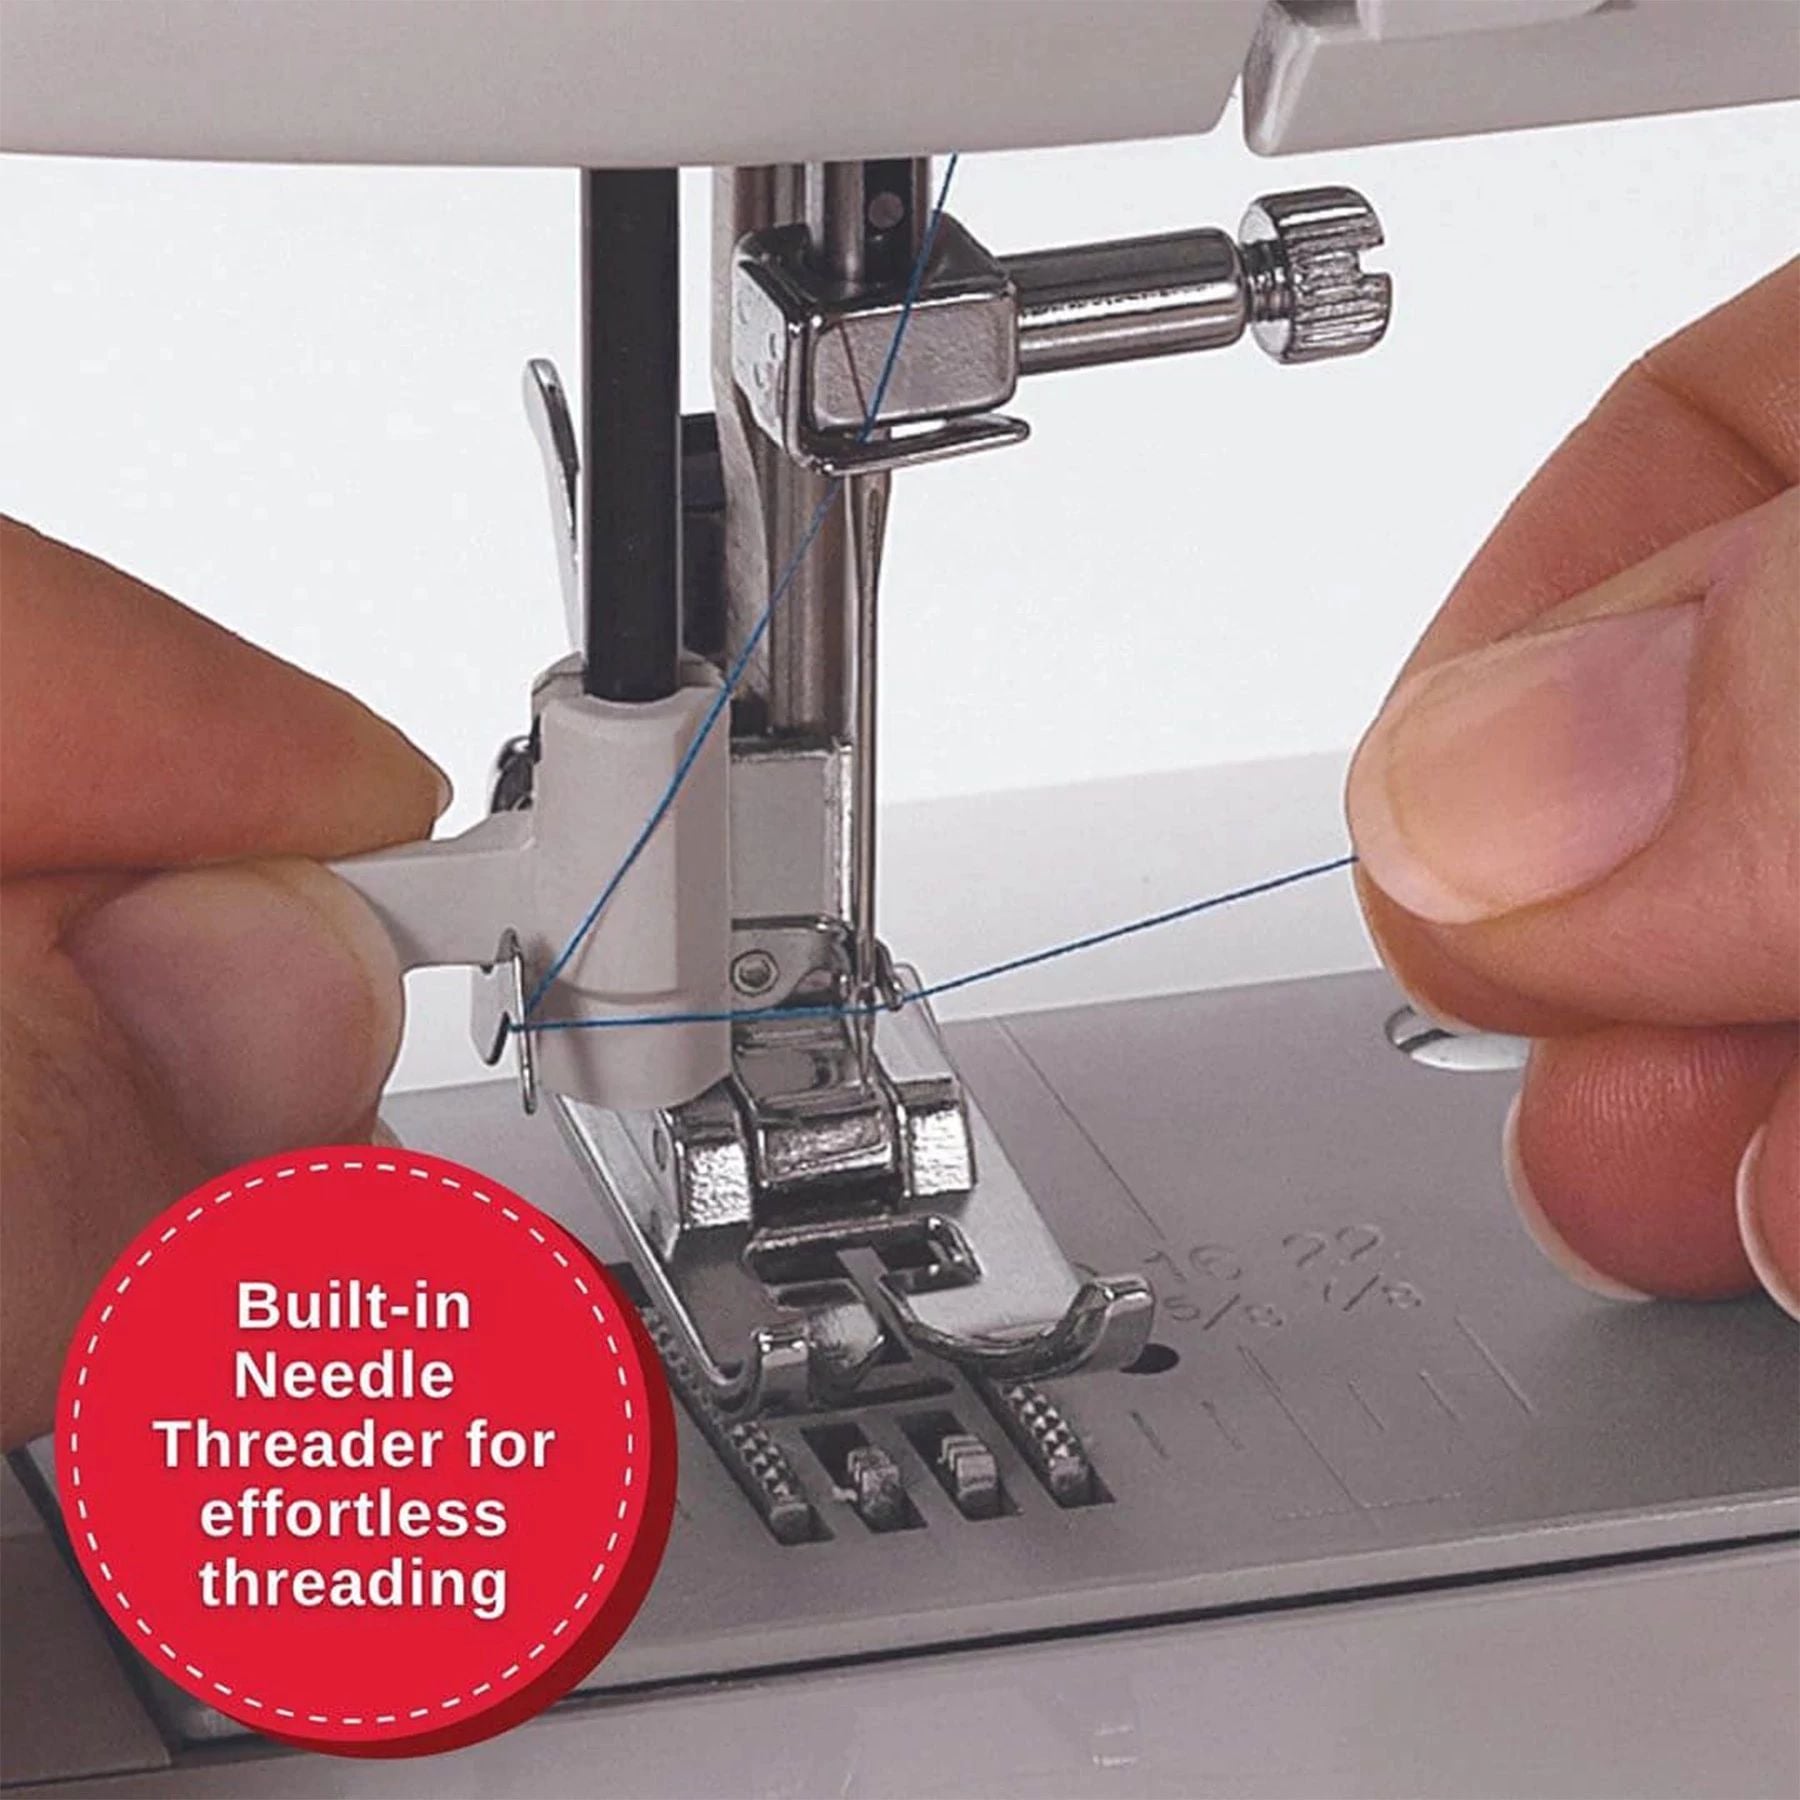 Close up of the Quantum Stylist 9960 computerized sewing machine's built-in needle threader.